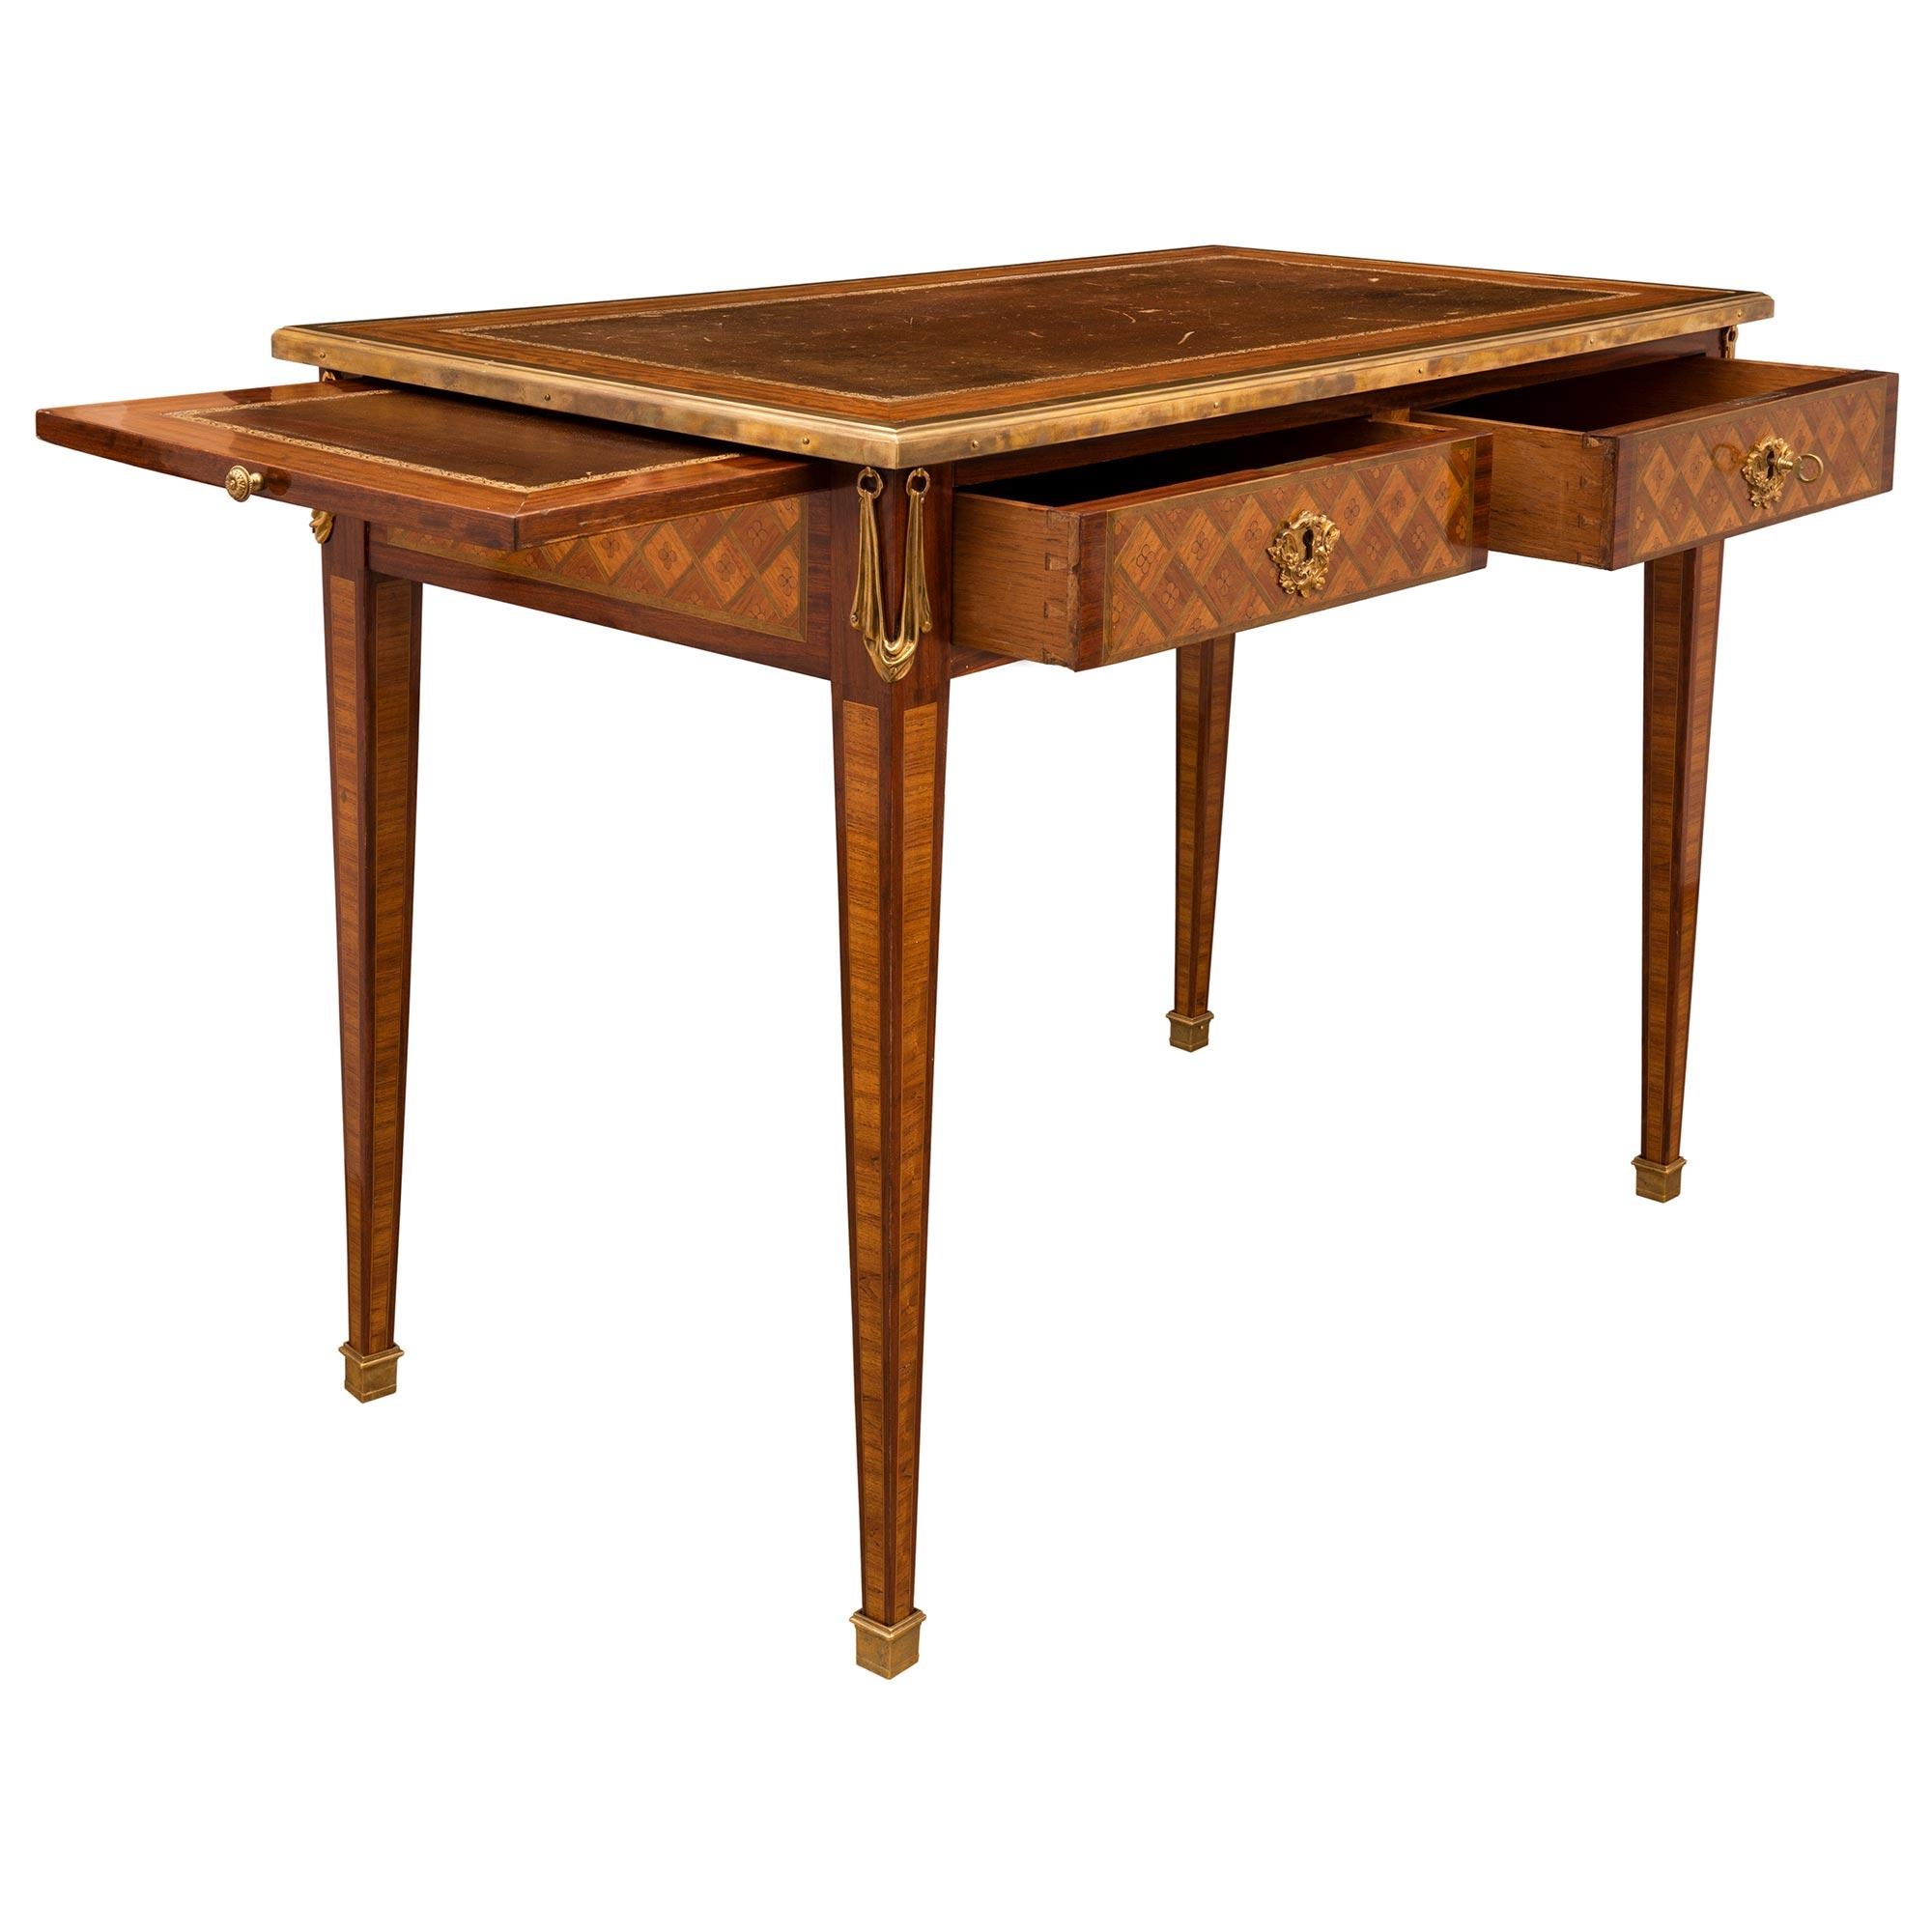 French Mid-19th Century Louis XVI Style Tulipwood, Kingwood and Charmwood Desk For Sale 1